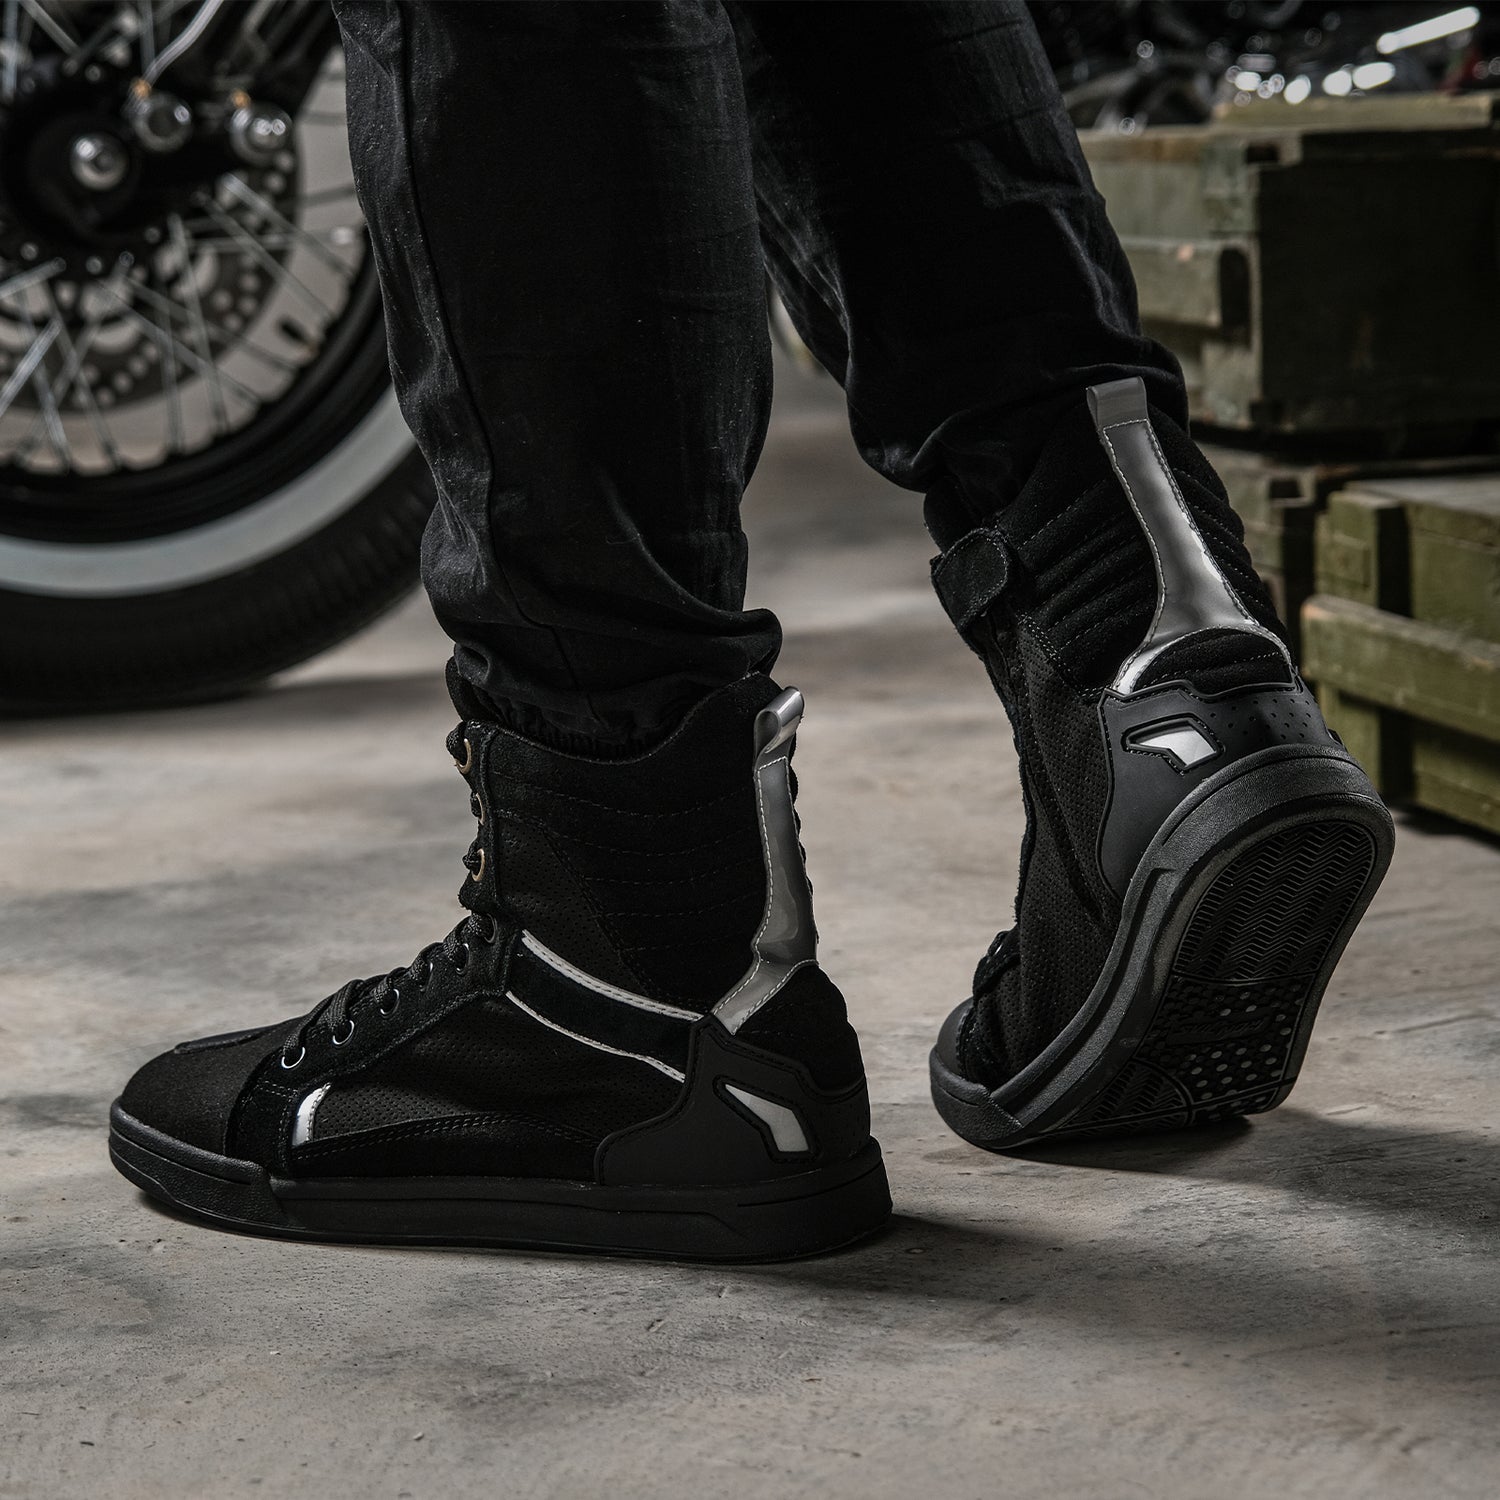 IRONJIAS Black Breathable Protective Motorcycle Boots | XZ002